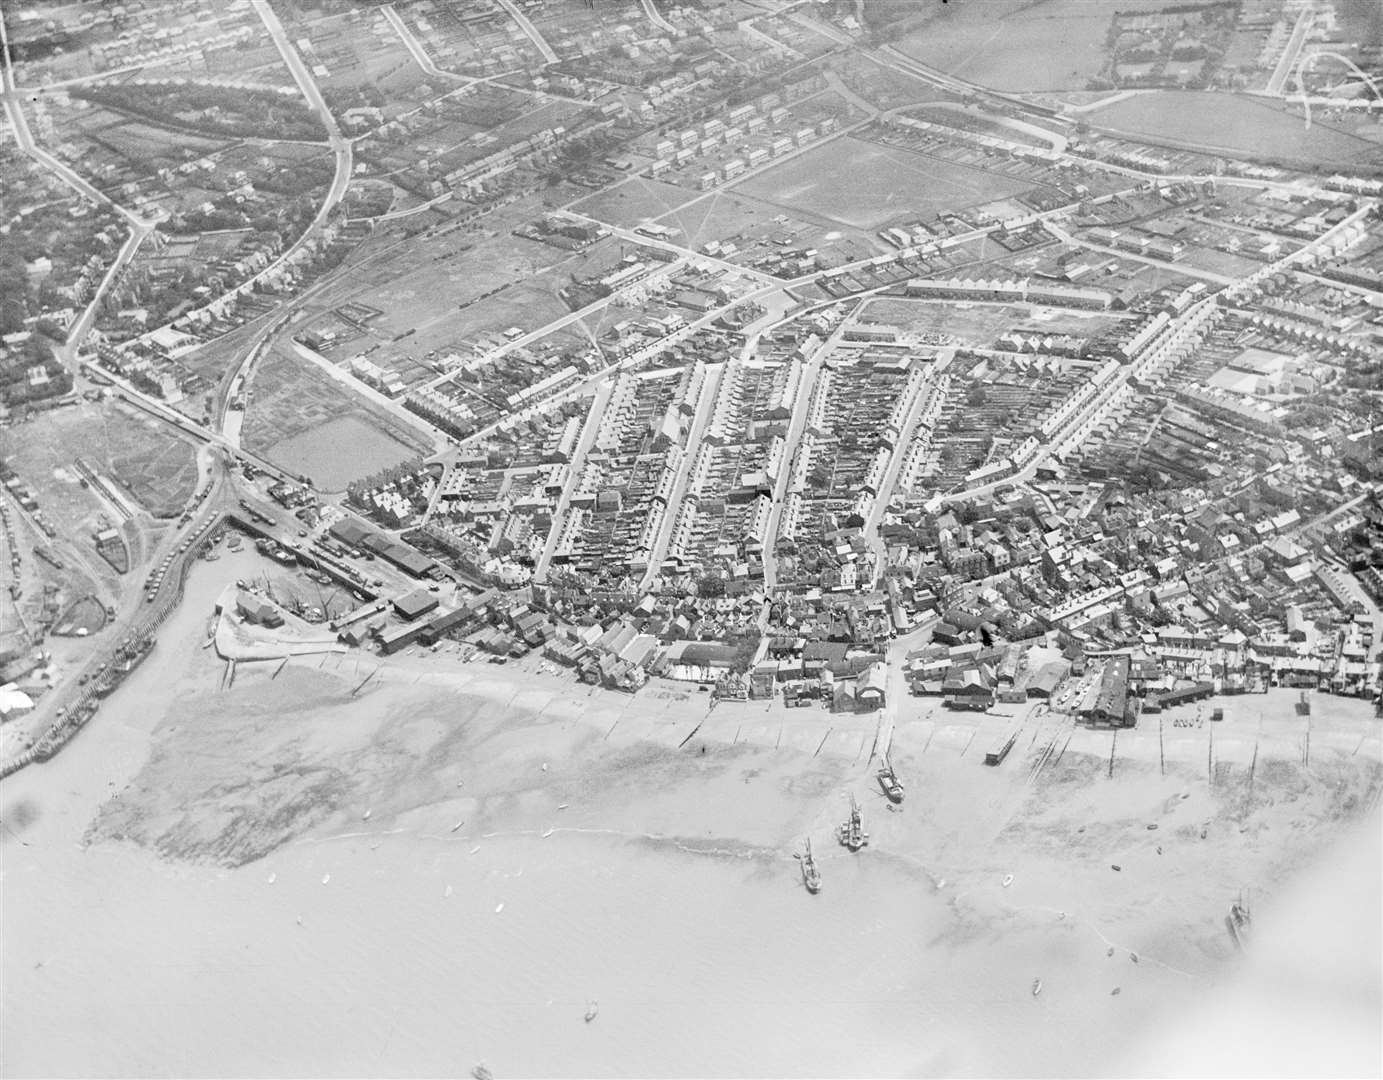 Whitstable from the skies in 1927 - with the harbour seen bottom left. Picture: Historic England